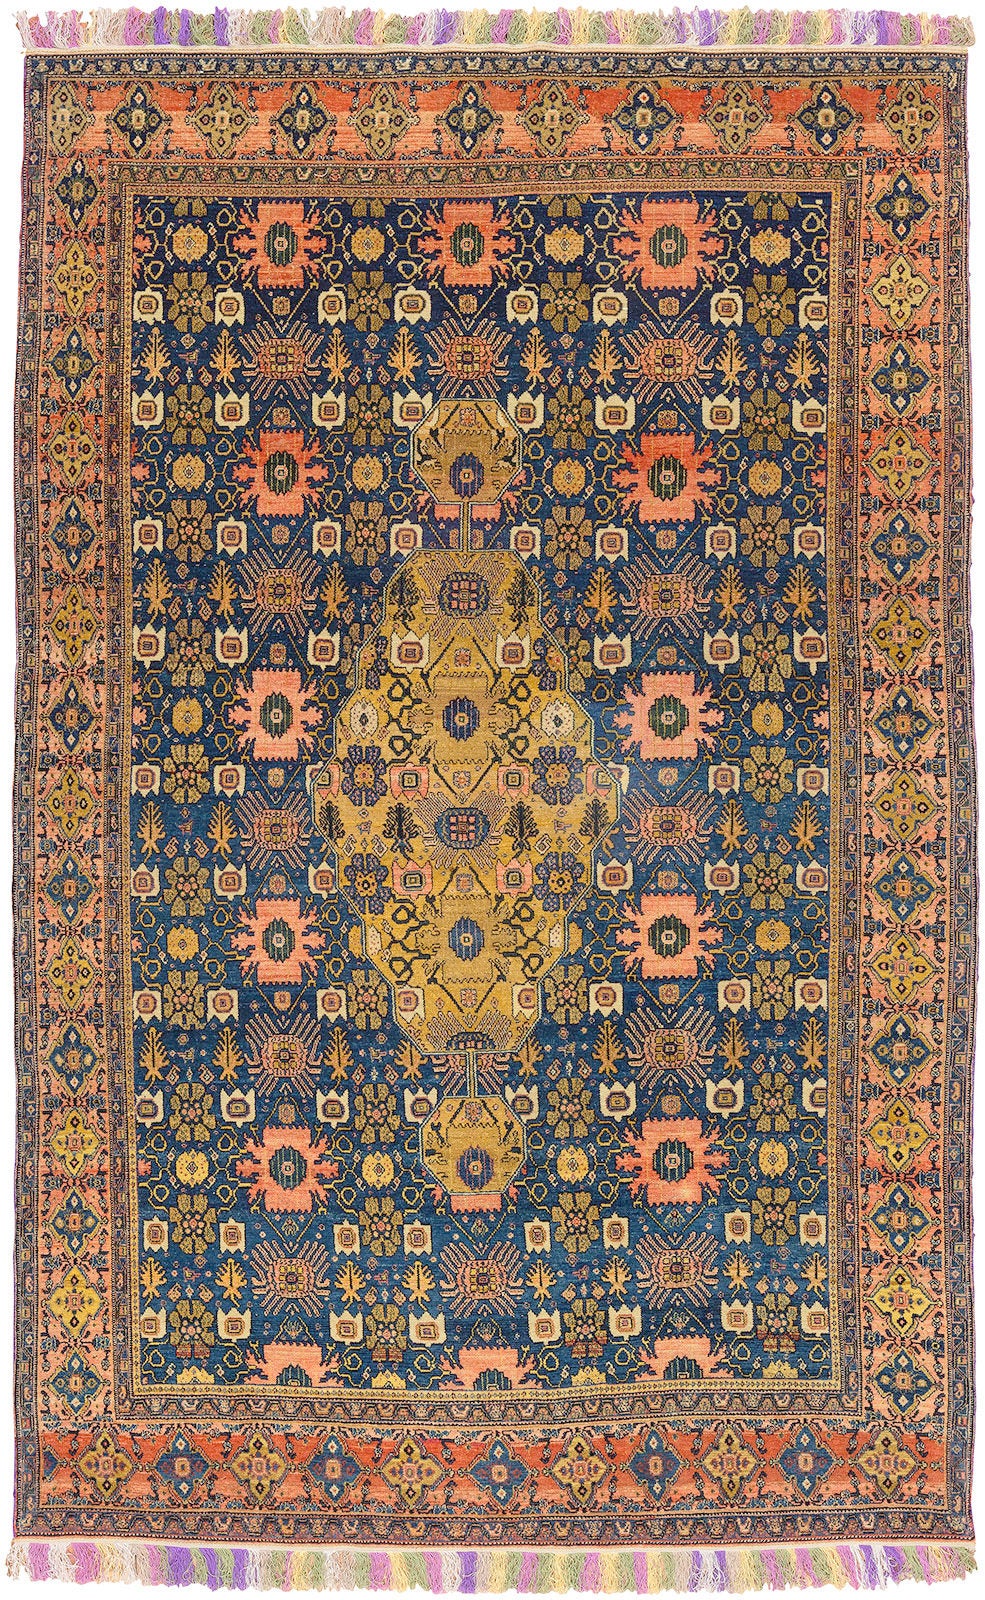 Spectacular collector-level finely woven early 20th century Persian Senneh rug. The weaver added a multicolored fringe that we have never seen. 

4'5'' x 6'11''

Antique Senneh rugs are one of the most distinctive of all Persian rugs, even